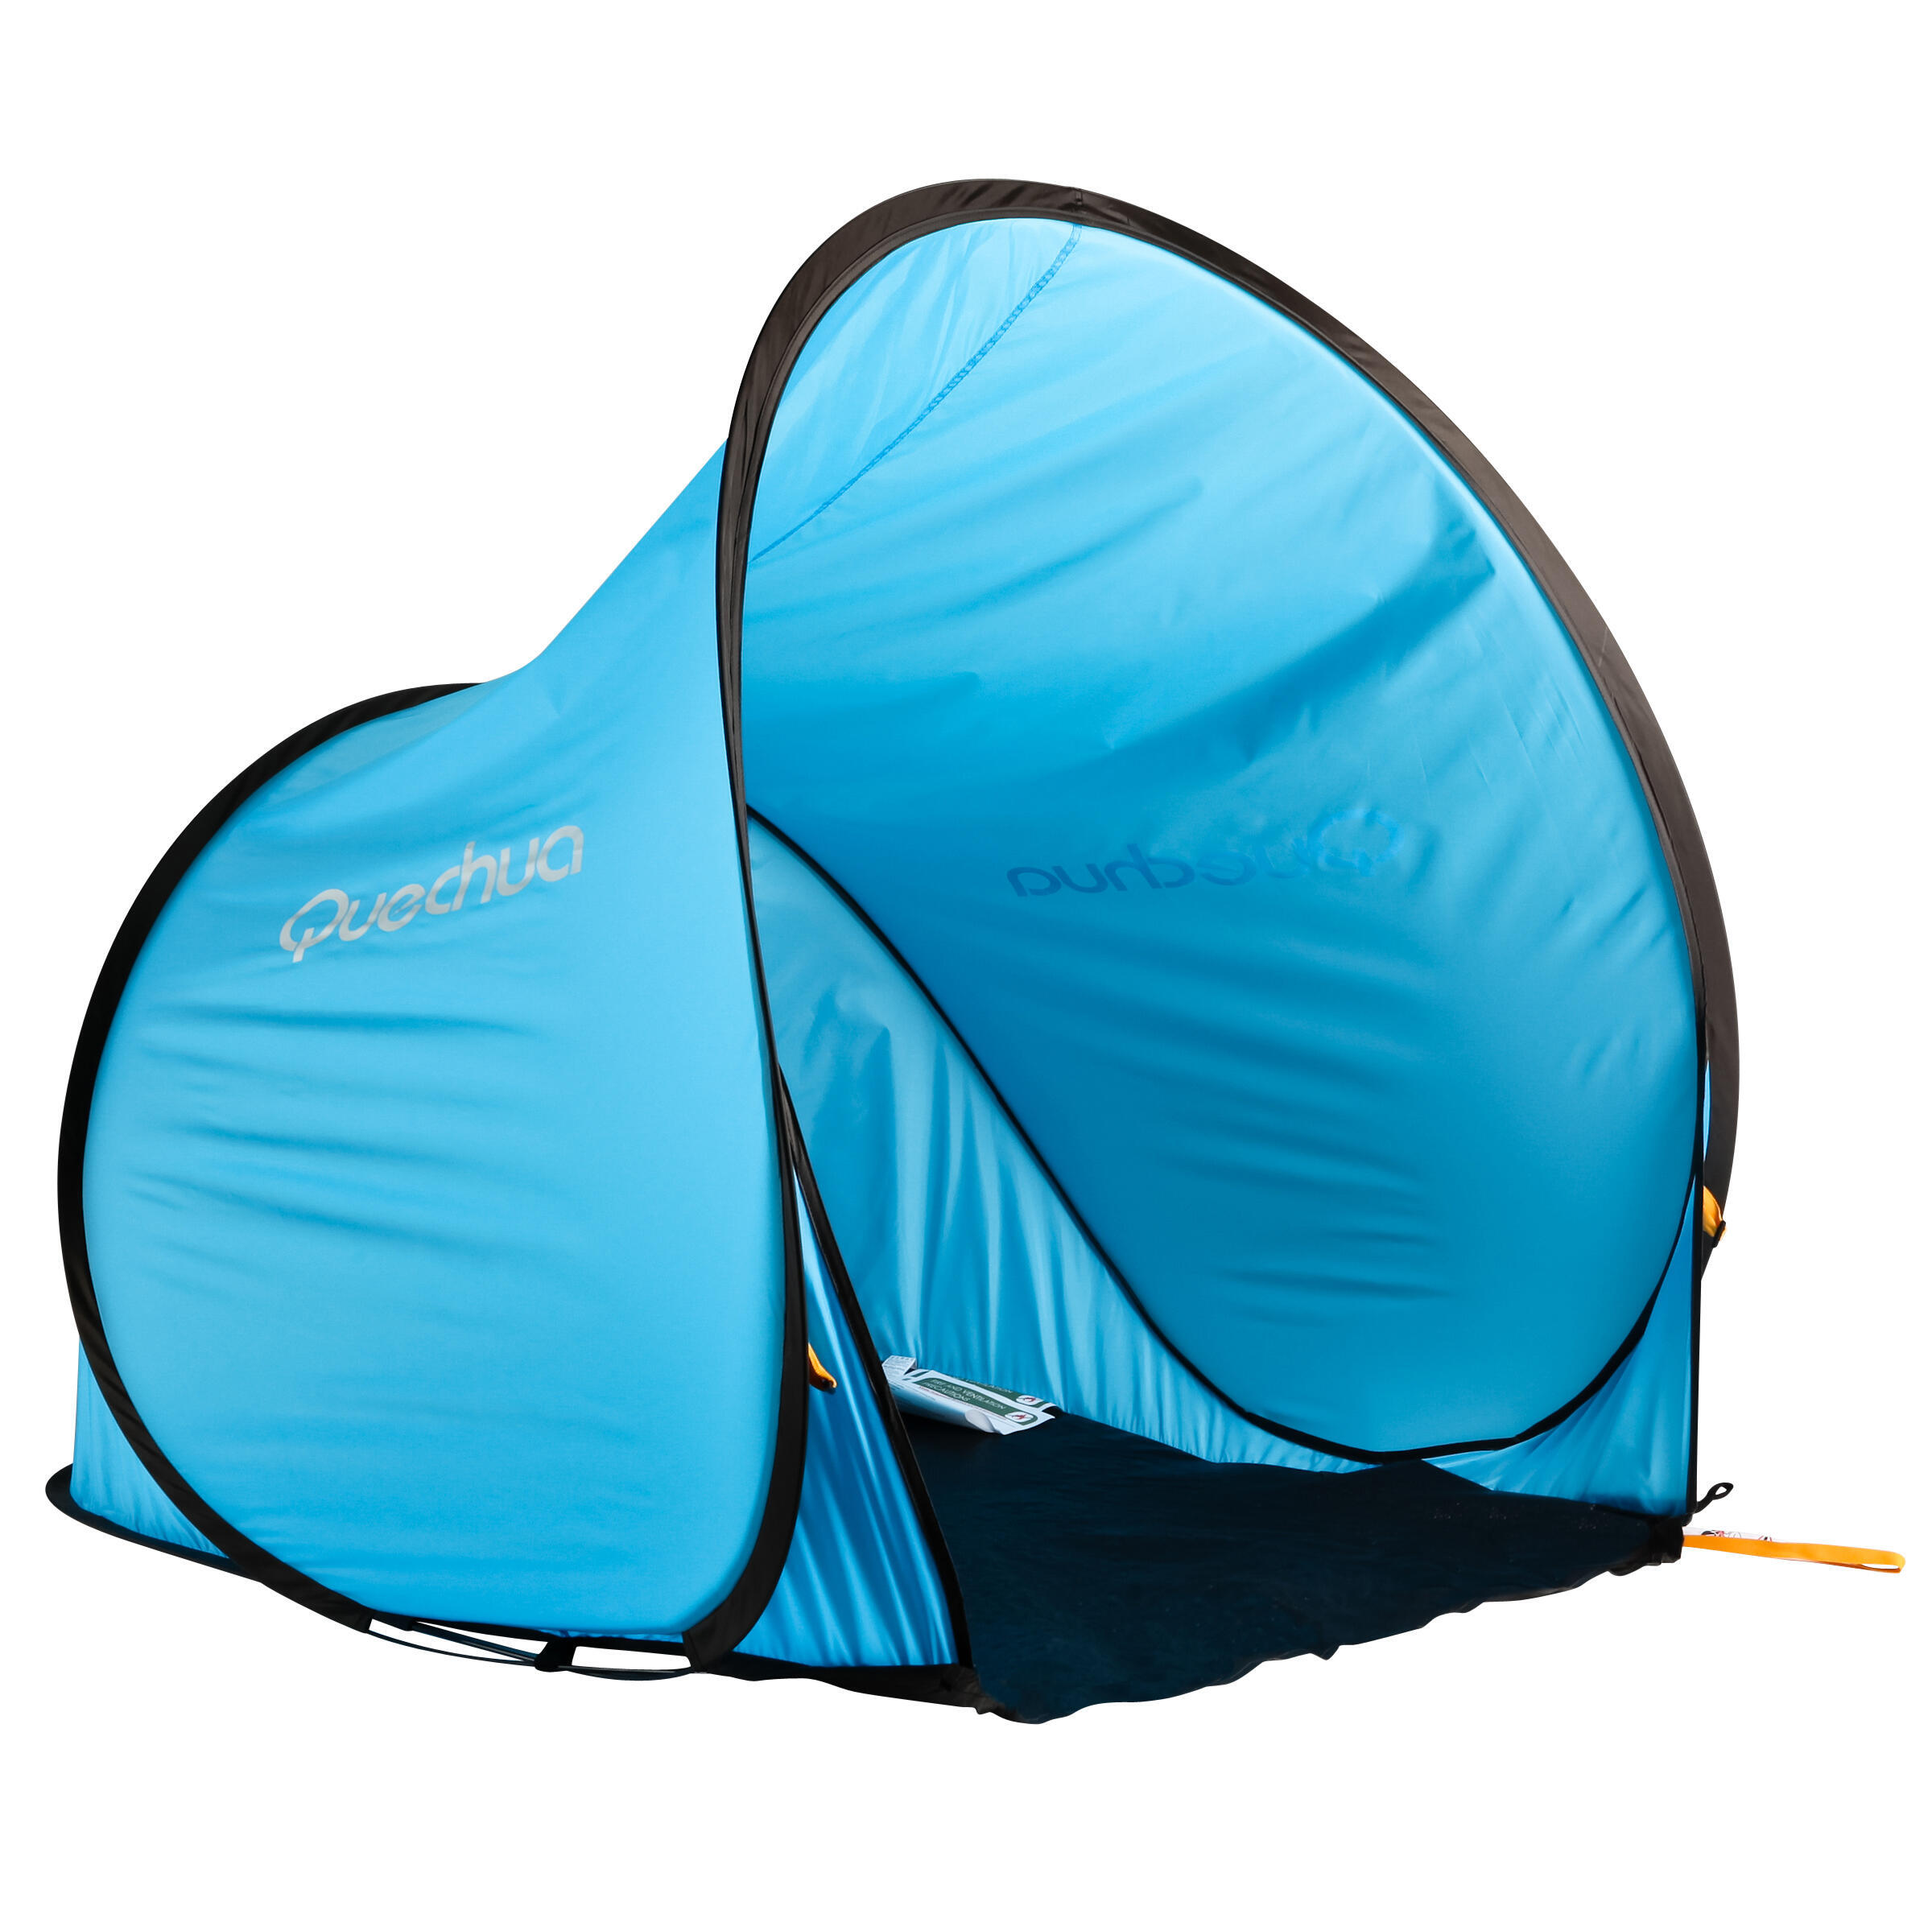 Instant camping shelter - 1 adult or 2 children - 2 seconds 0 1/13